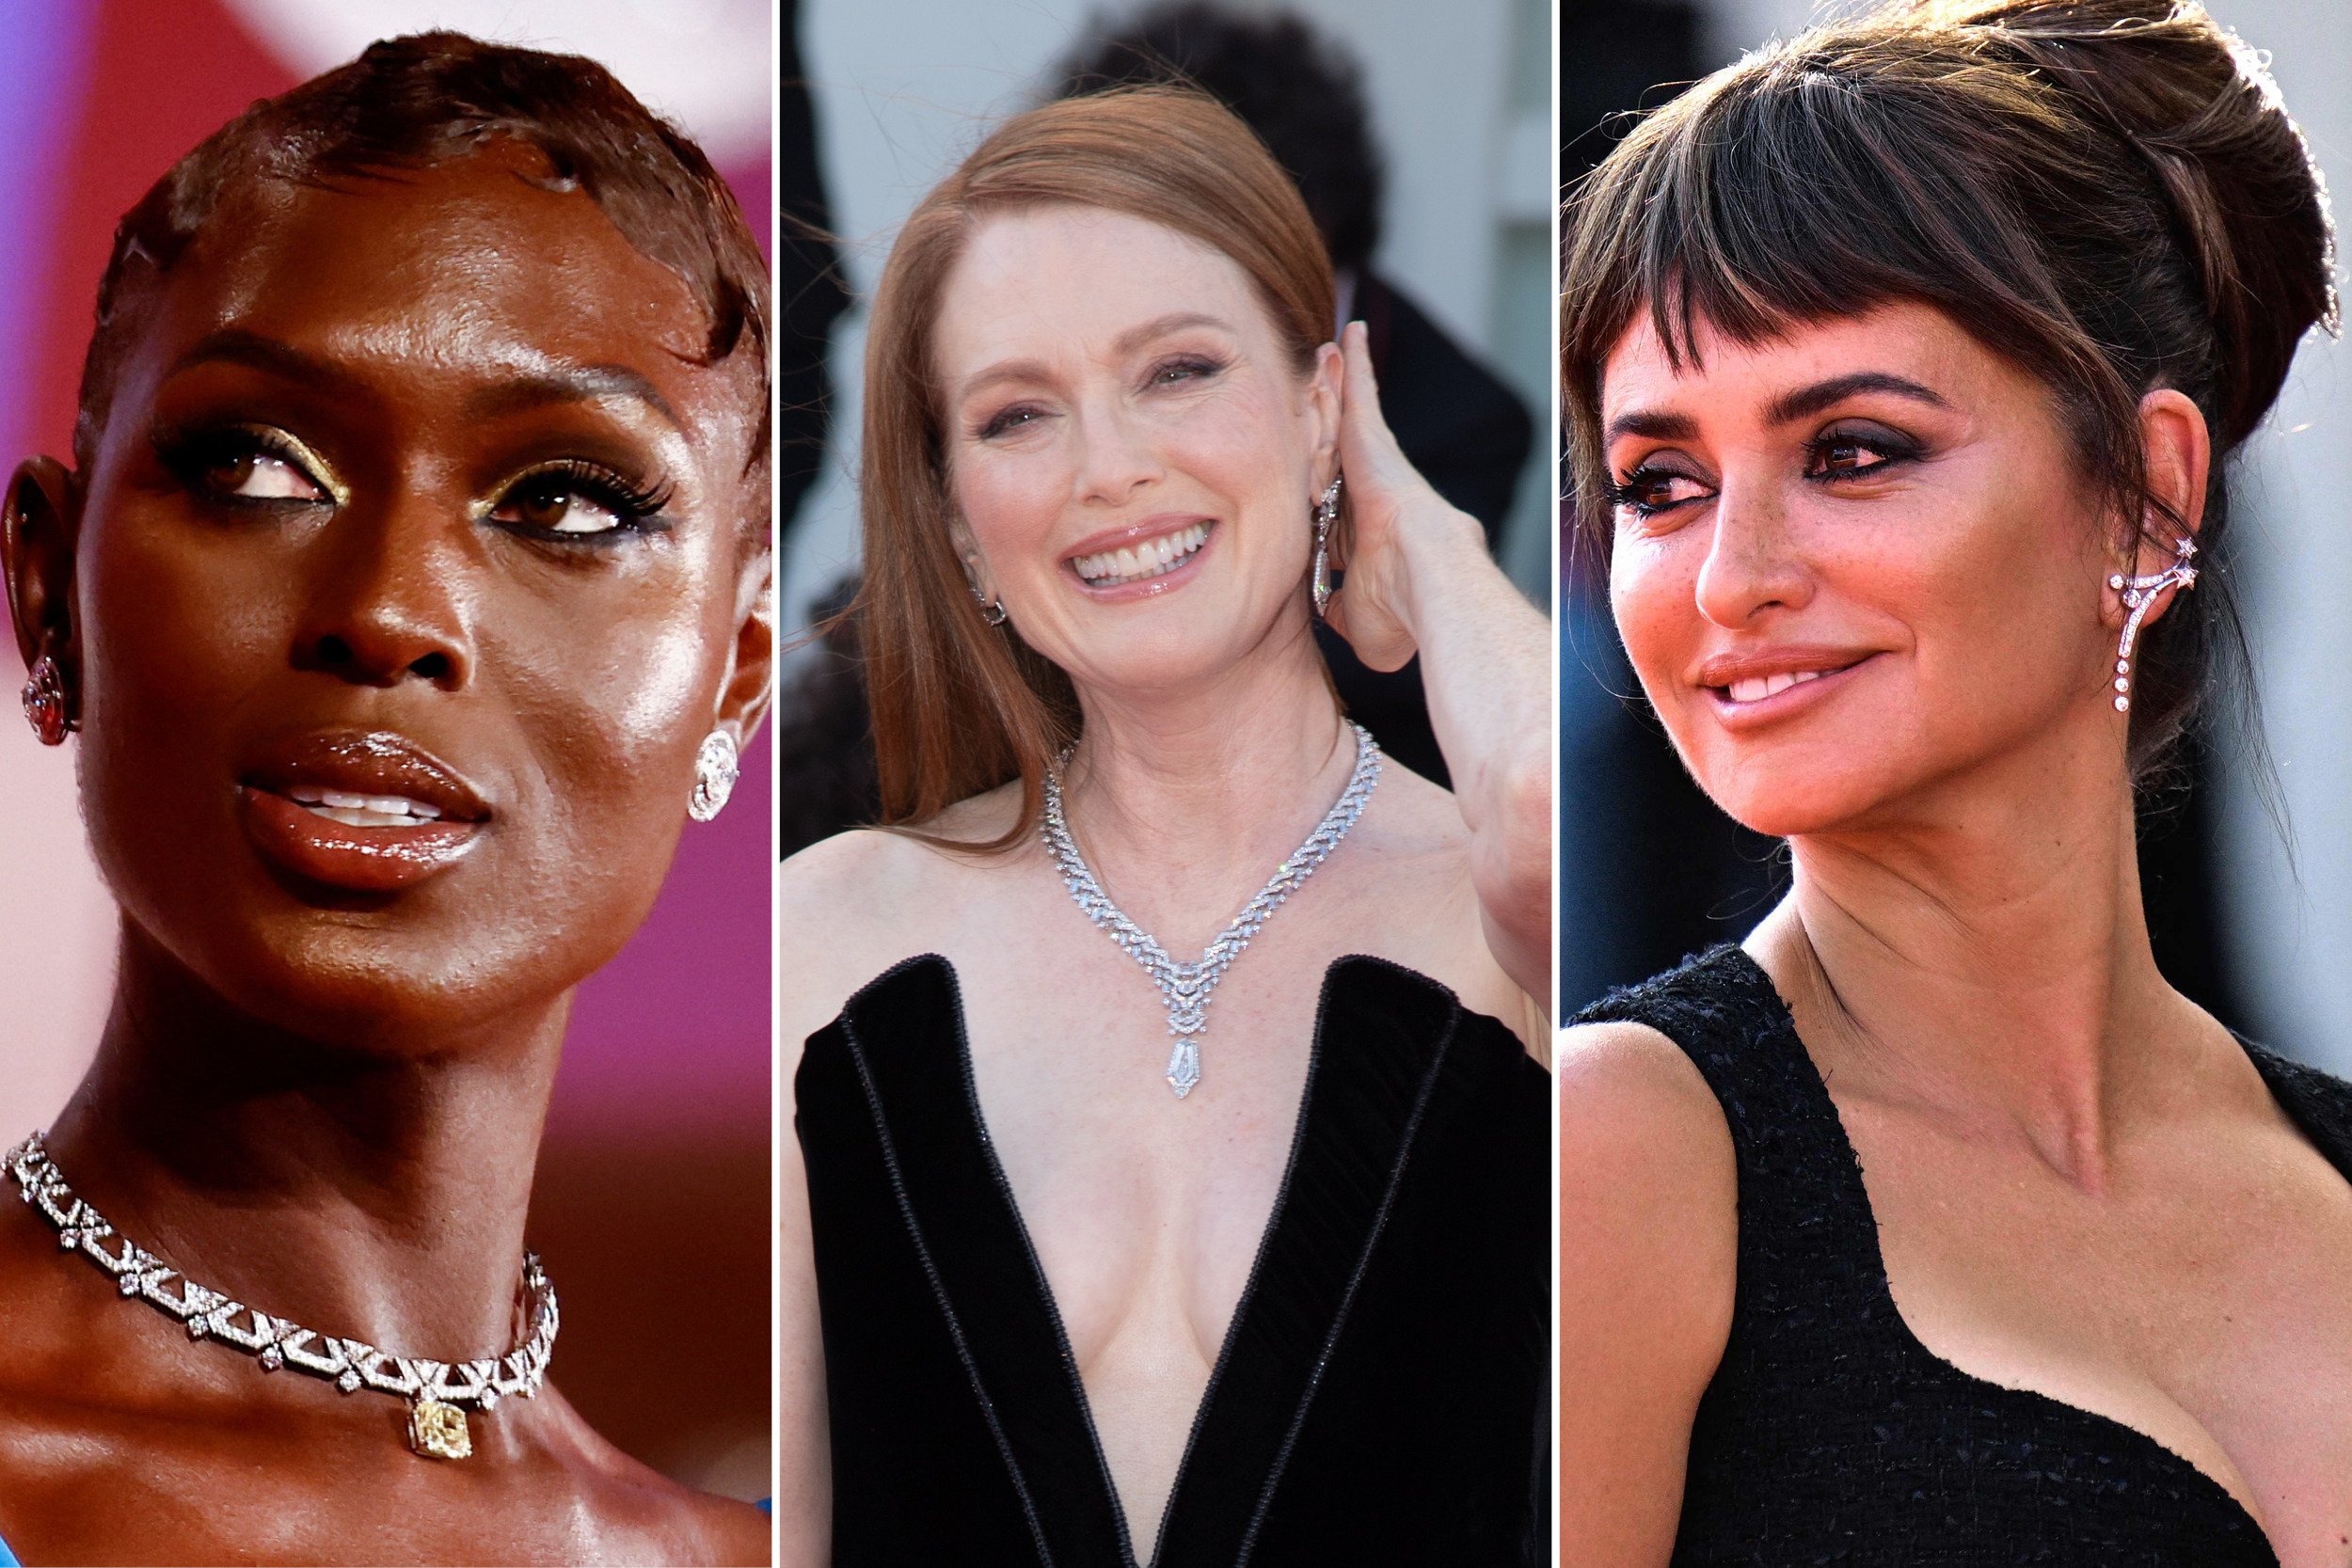 Jodie Turner-Smith, Julianne Moore and Penélope Cruz are some of the celebrities that dazzled at the 79th Venice Film Festival. Photos: Reuters, DPA, AFP